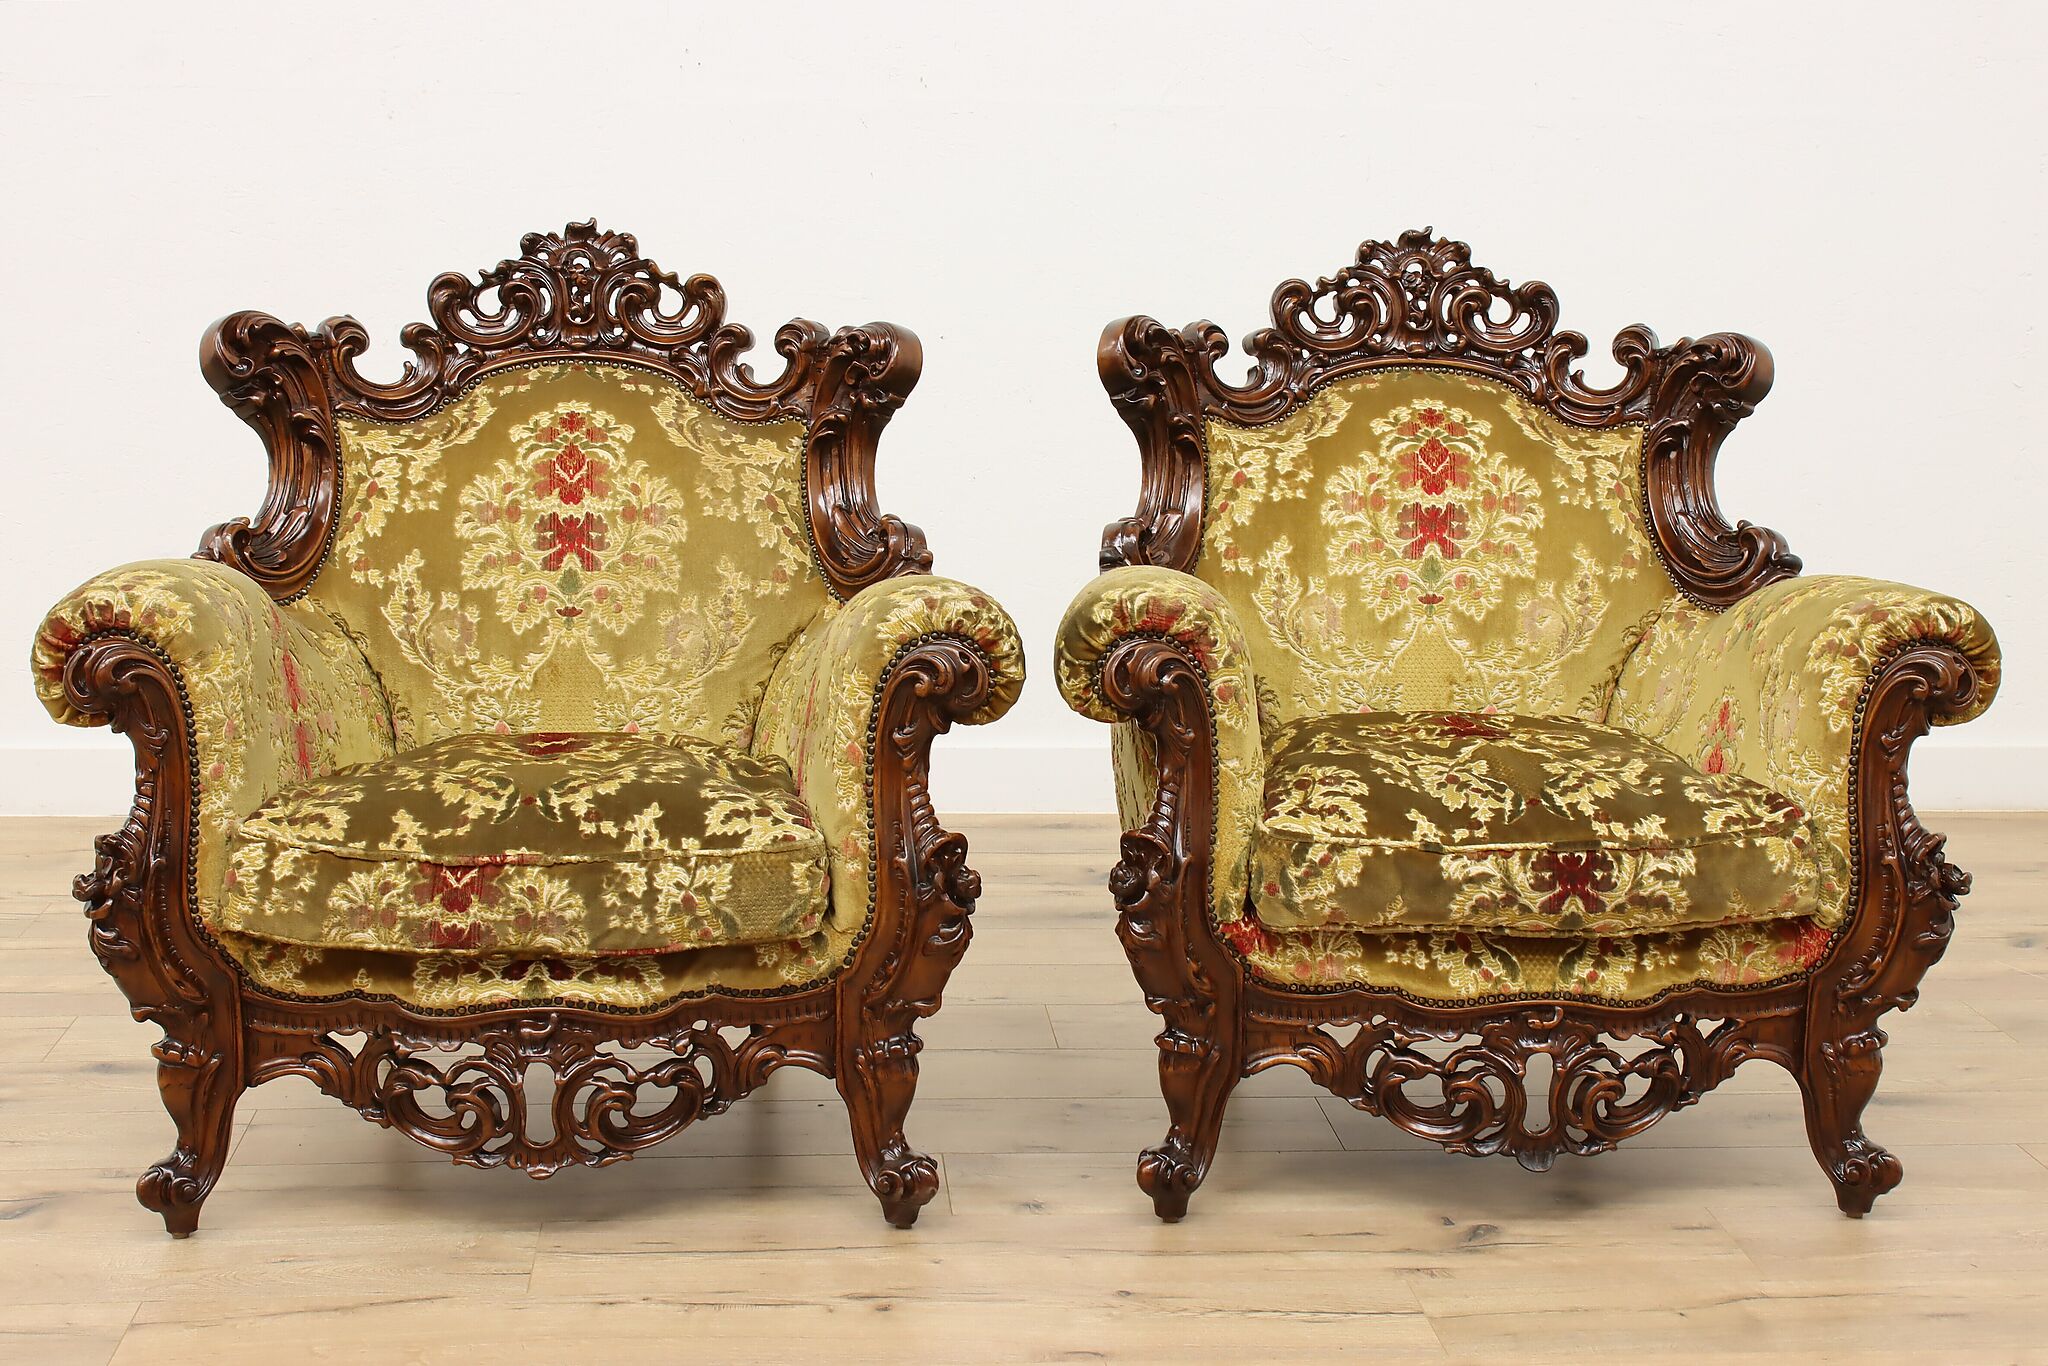 Pair of Italian Rococo Design Vintage Velvet Carved Chairs